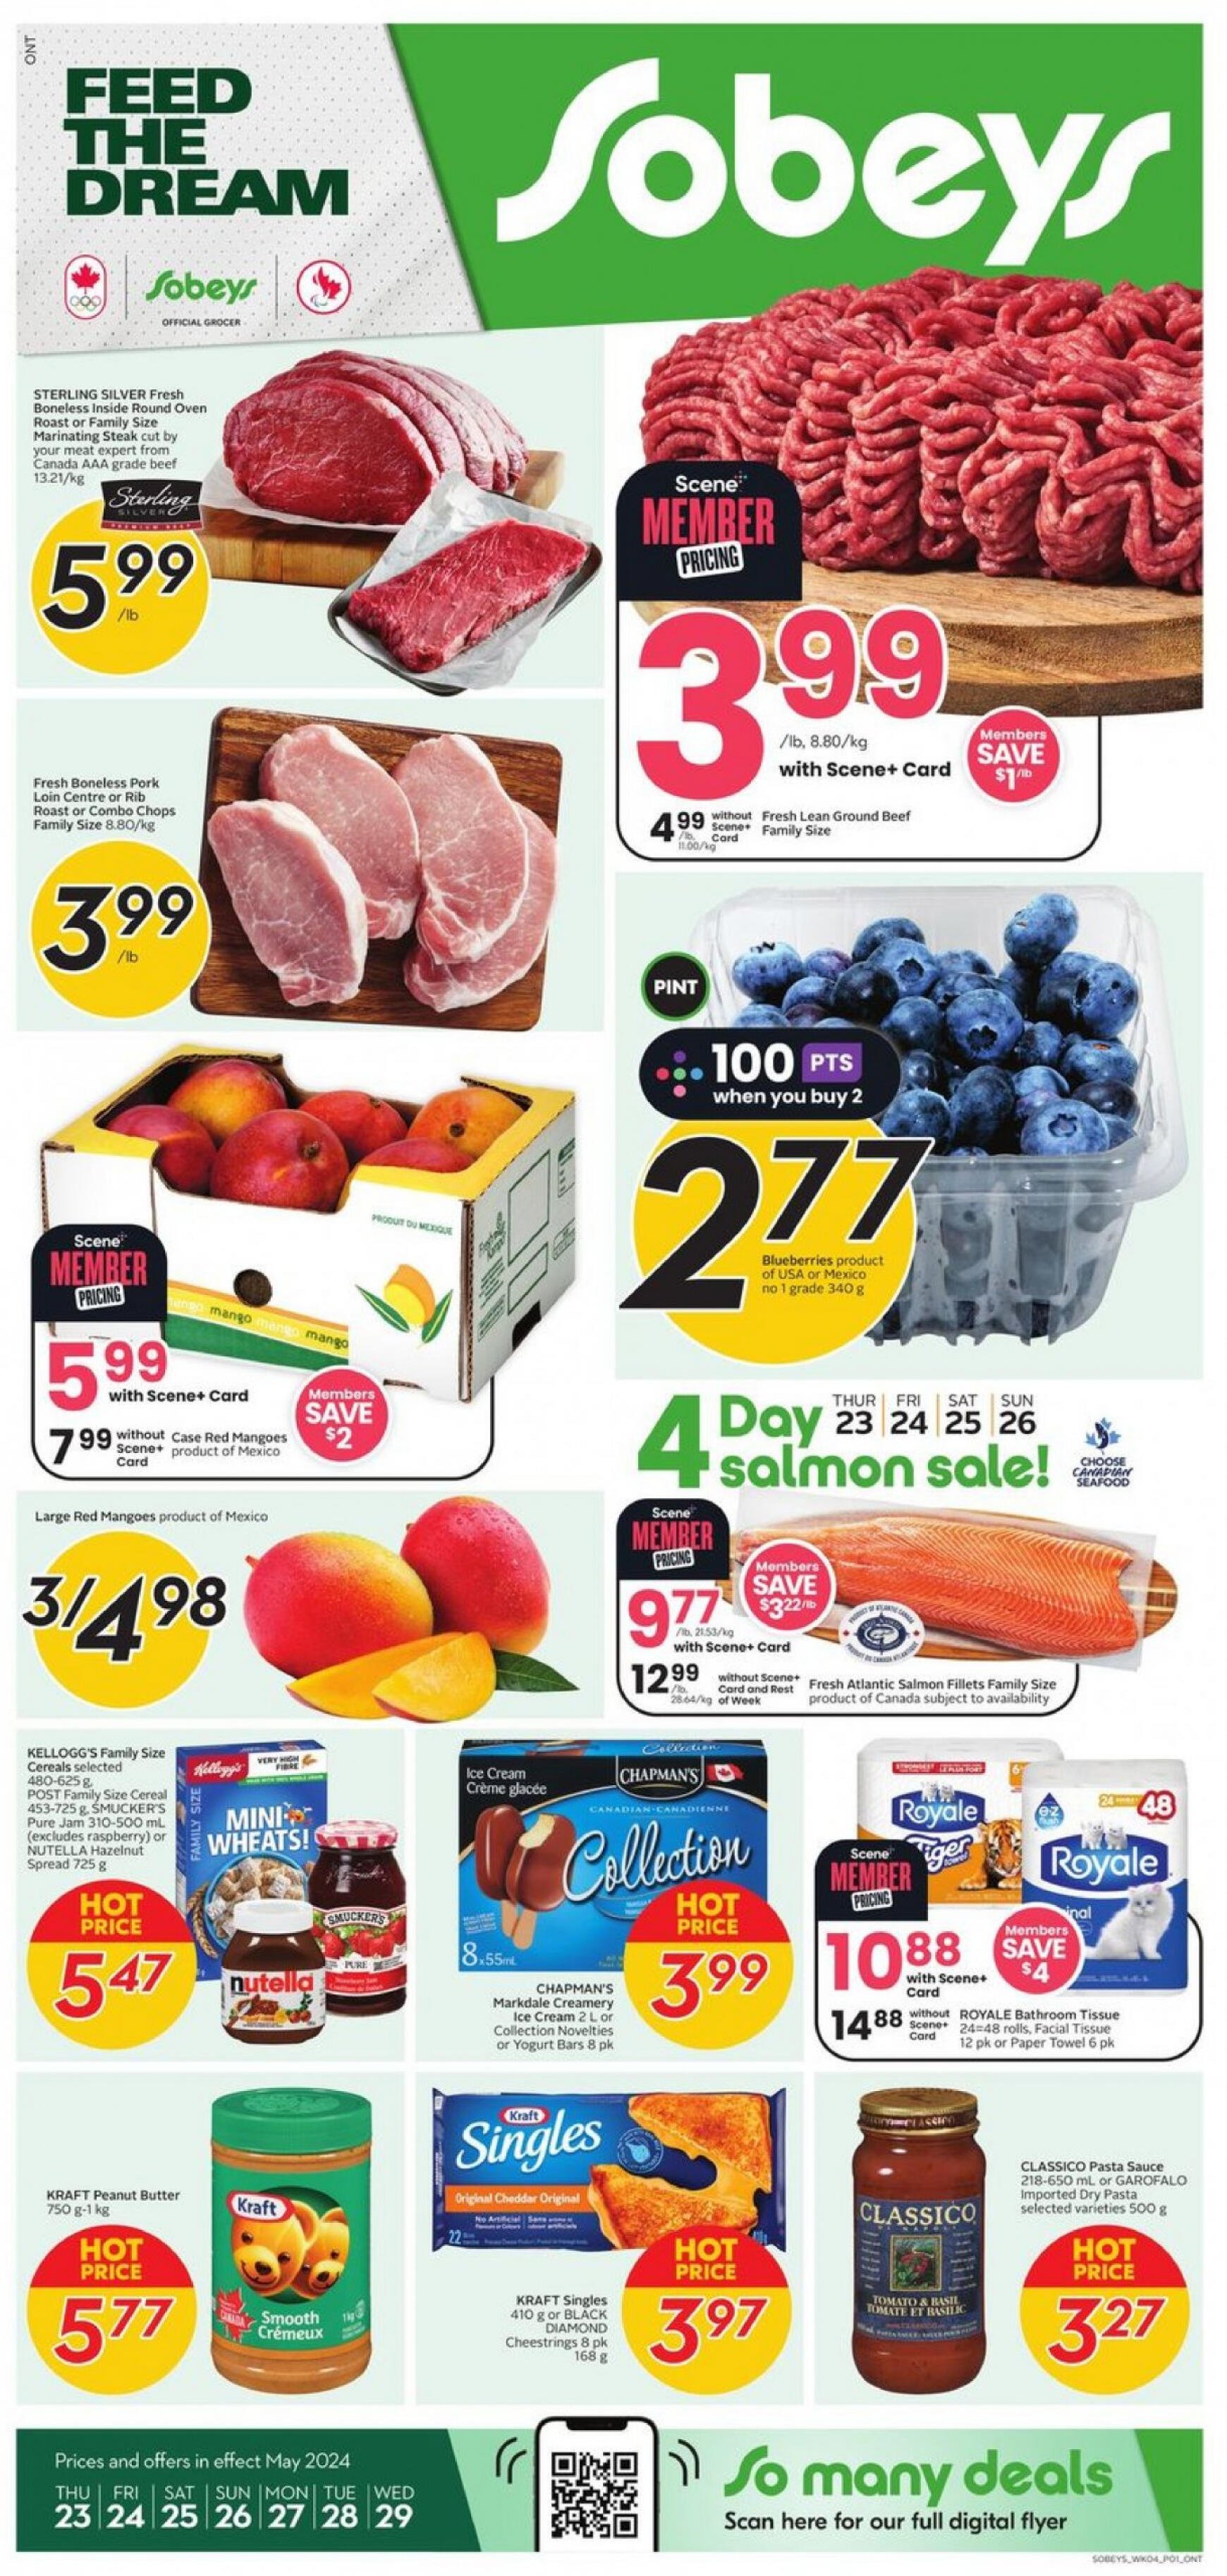 sobeys - Sobeys - Weekly Flyer - Ontario flyer current 23.05. - 29.05. - page: 1